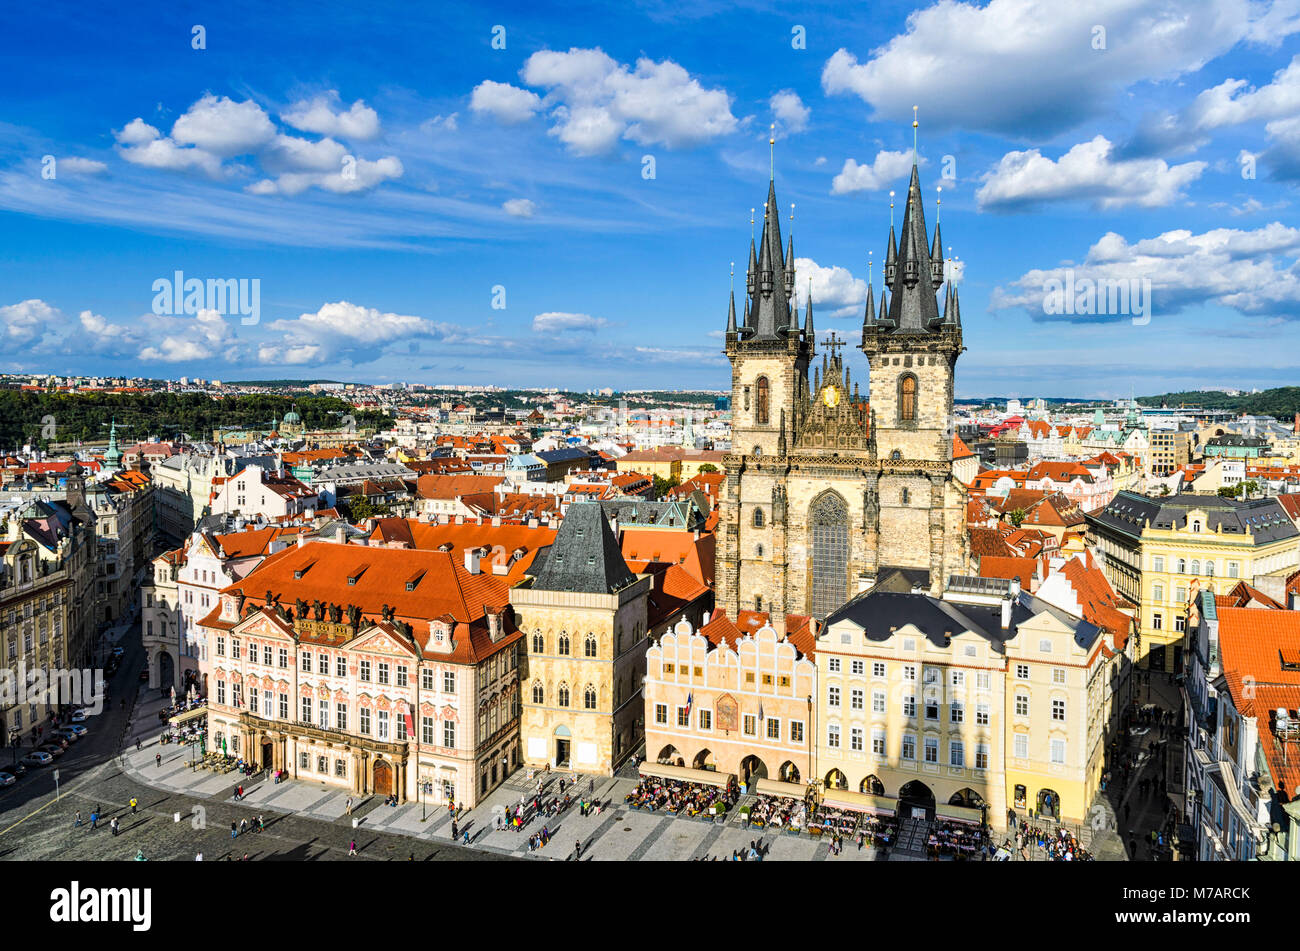 Old Town Square in Prague, Czech Republic on a sunny day Stock Photo